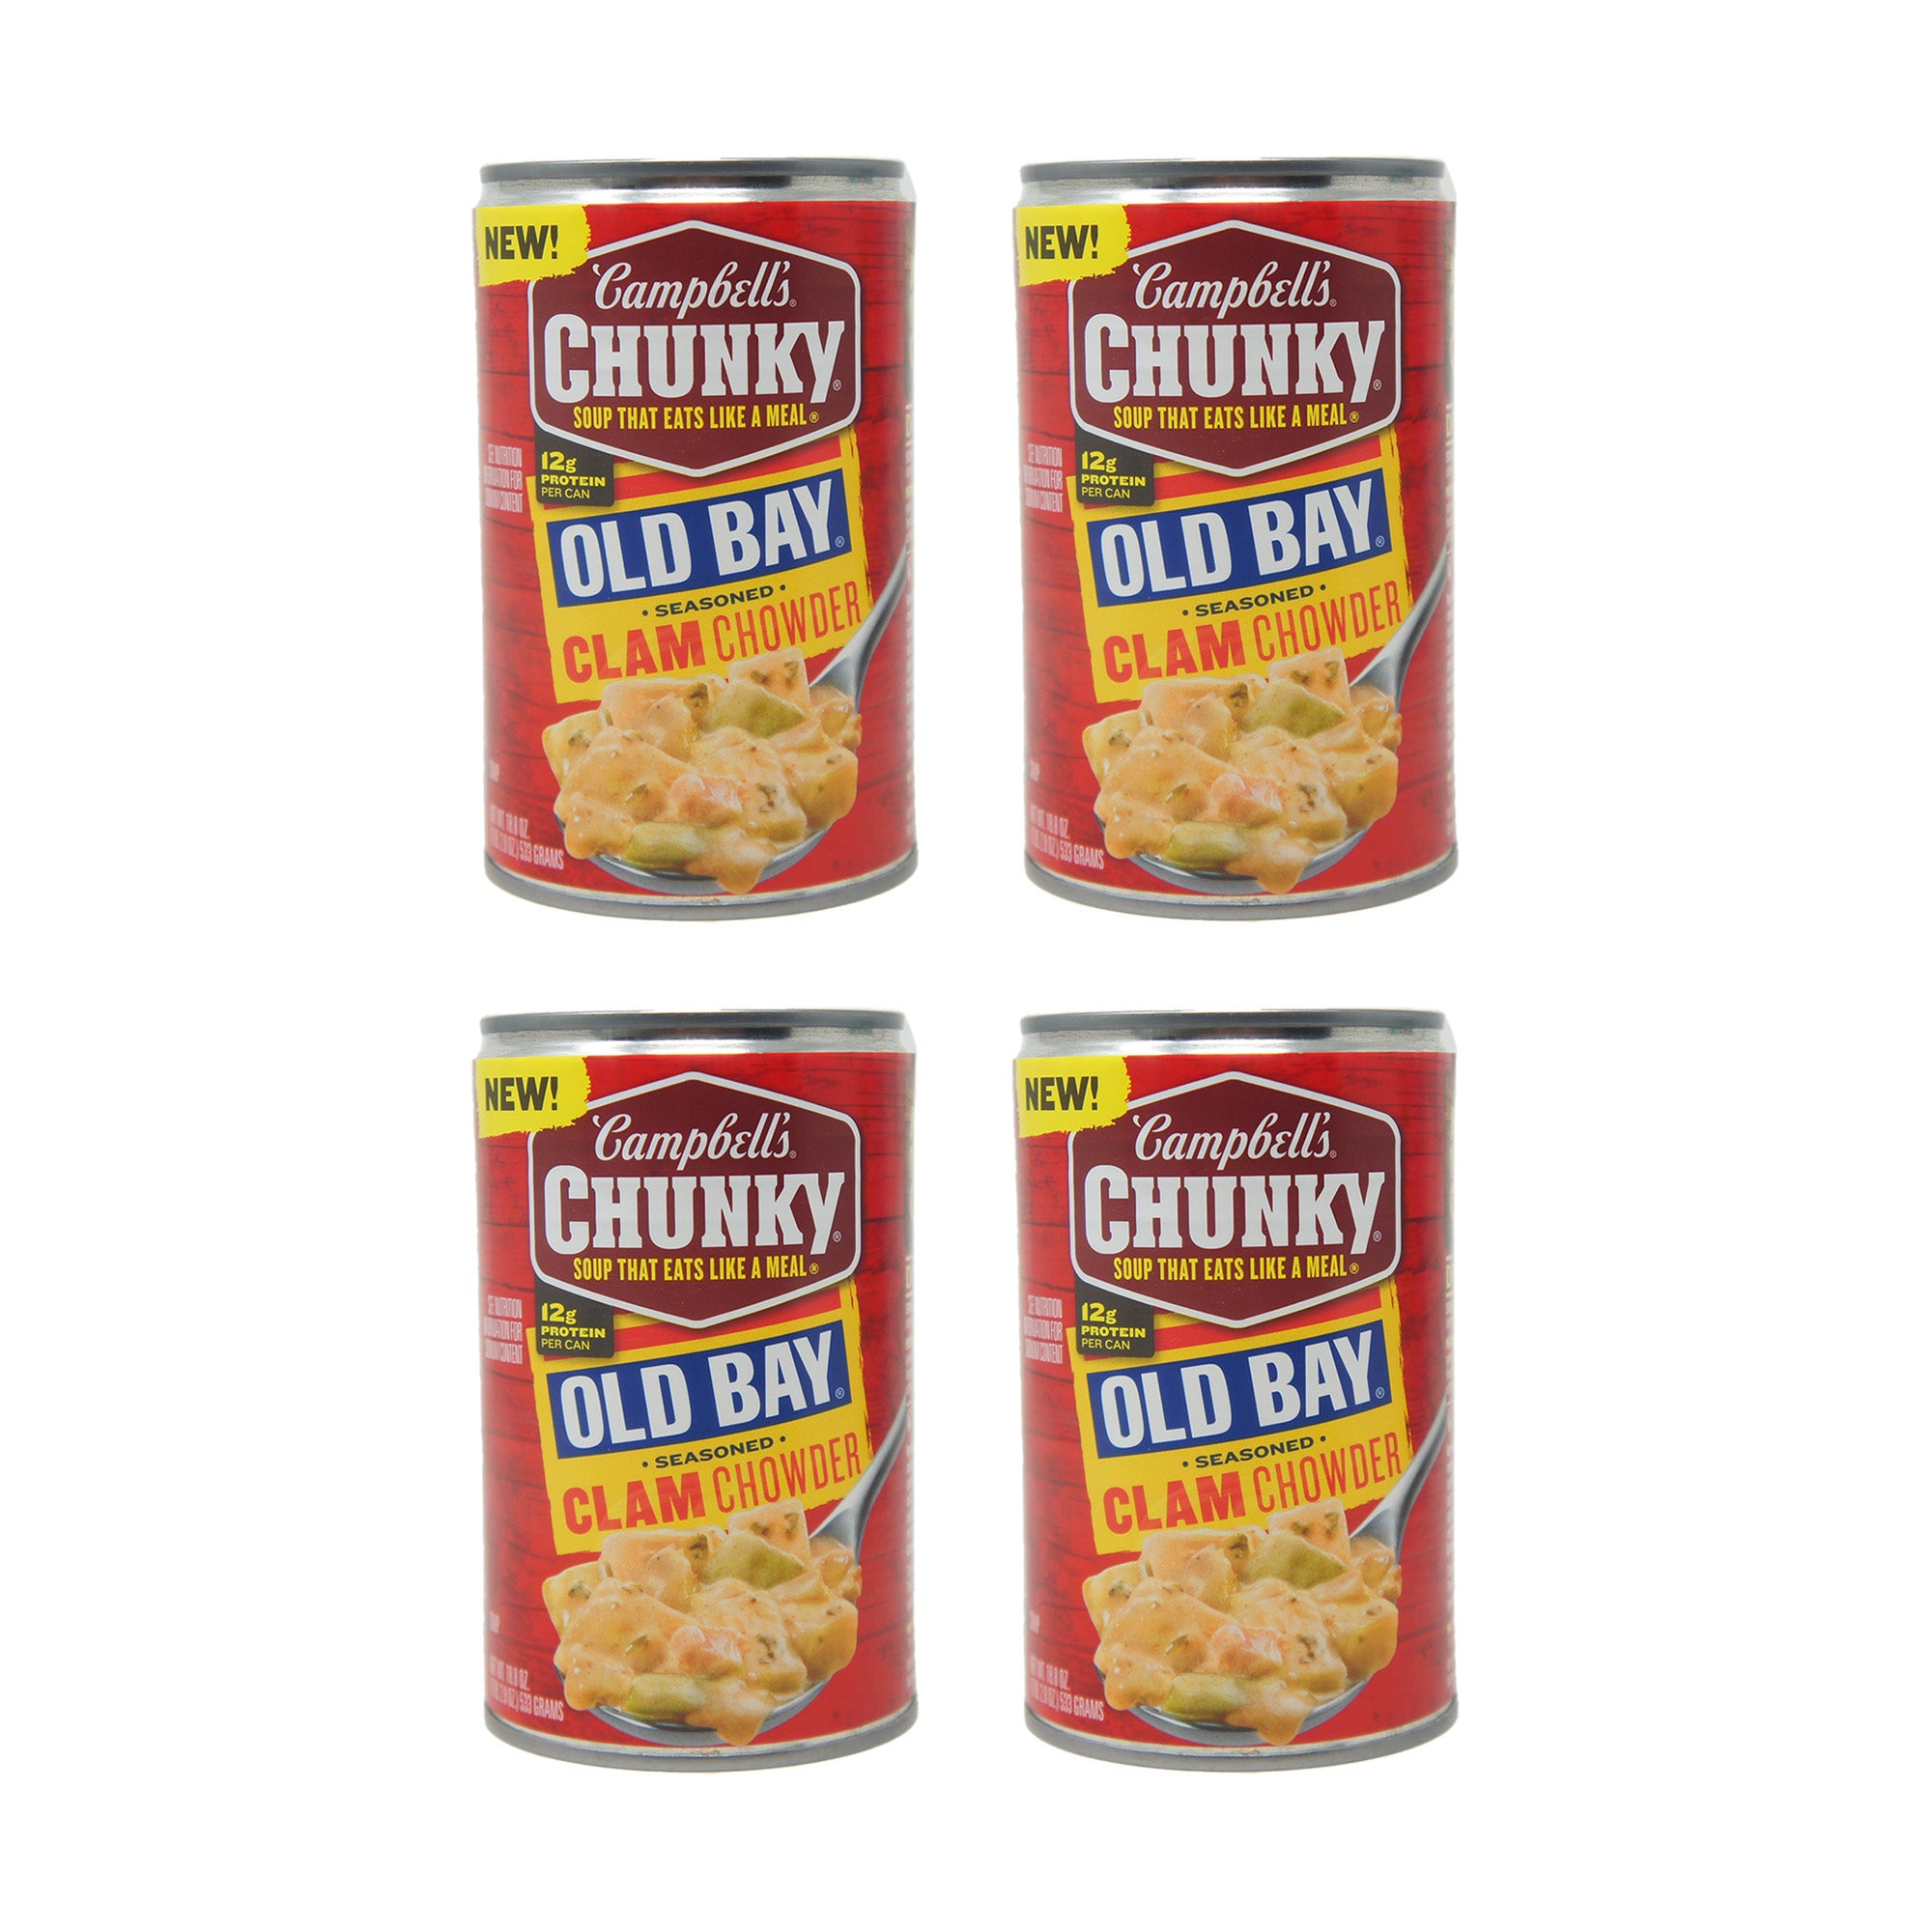 Campbell's Chunky Soup Clam Chowder Old Bay Seasoned, 18.8 oz Can (4 Pack)